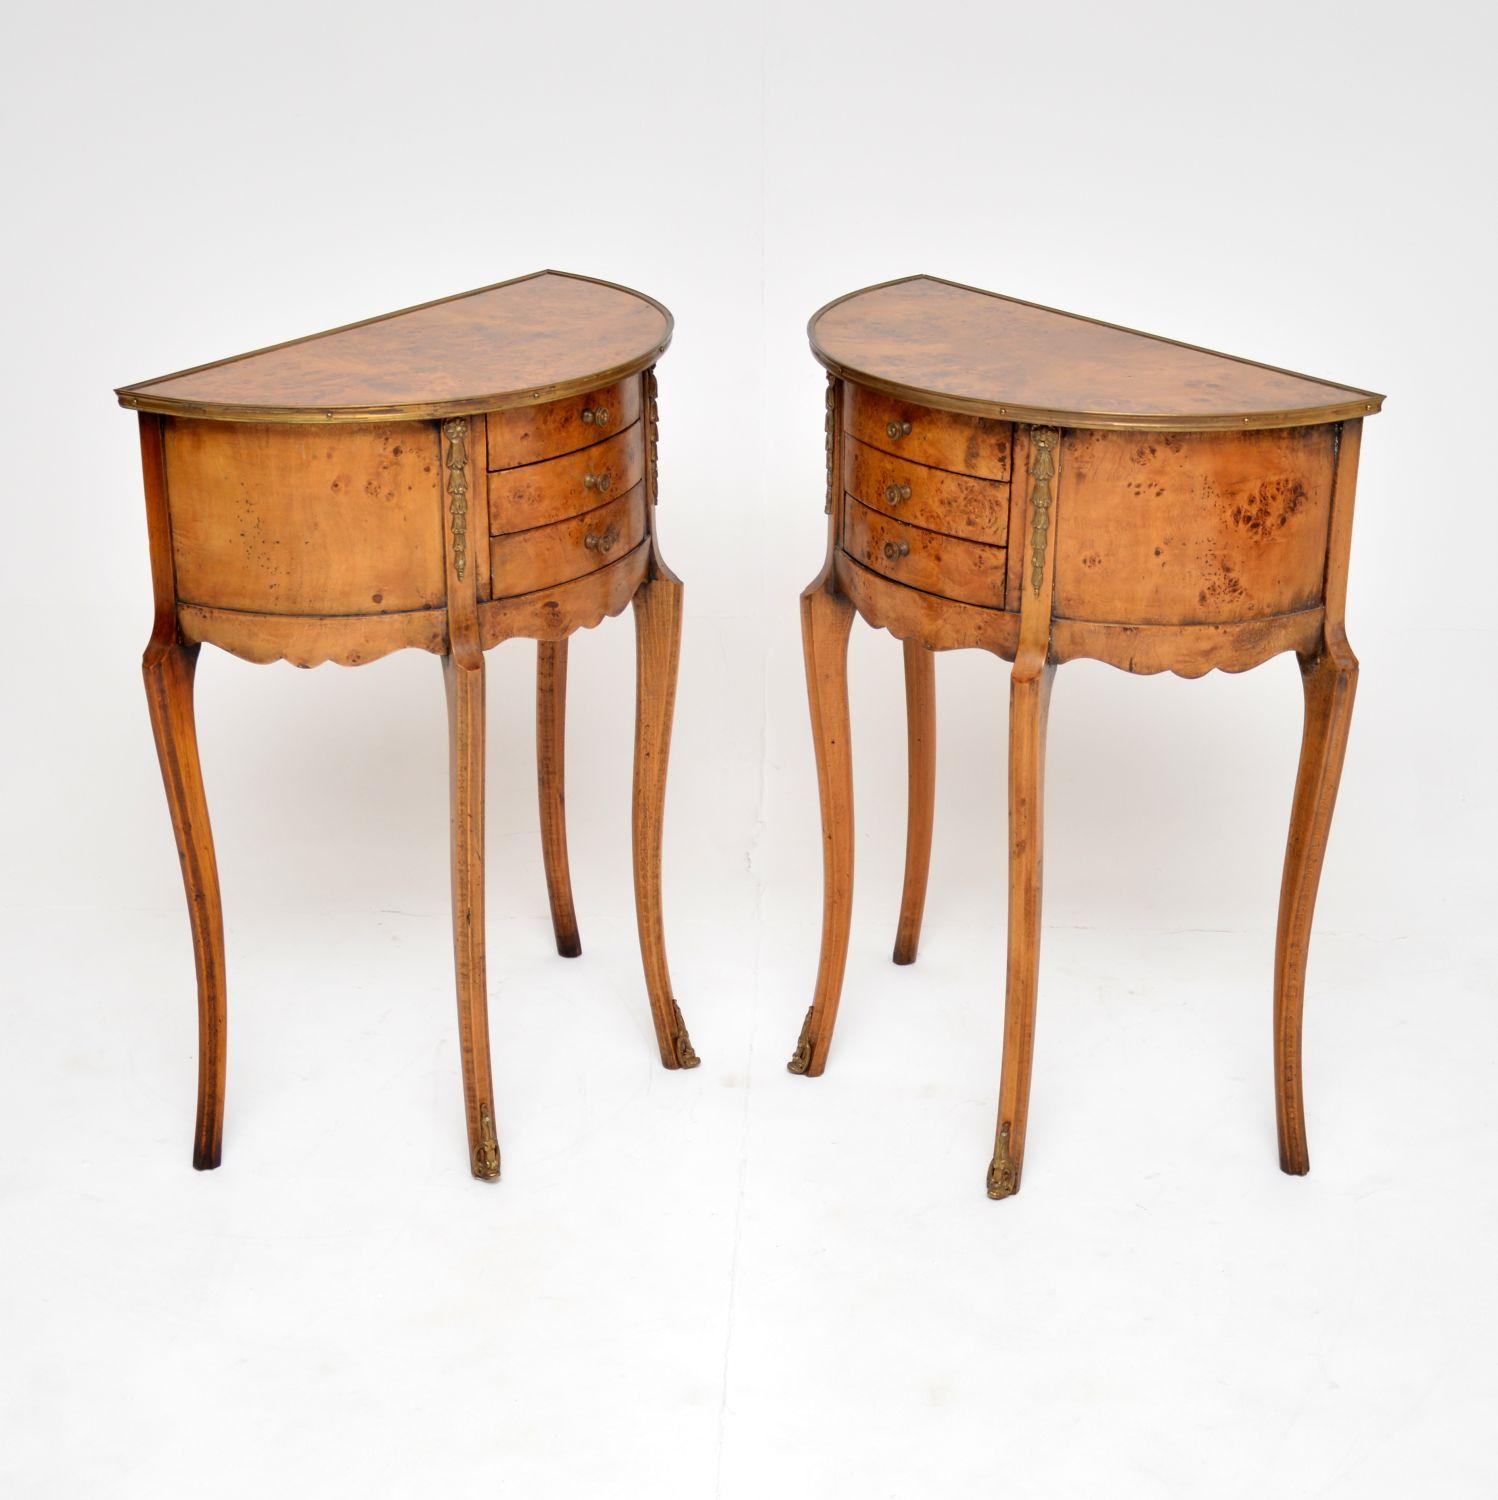 Louis XV Pair of Antique French Burr Walnut Side Tables